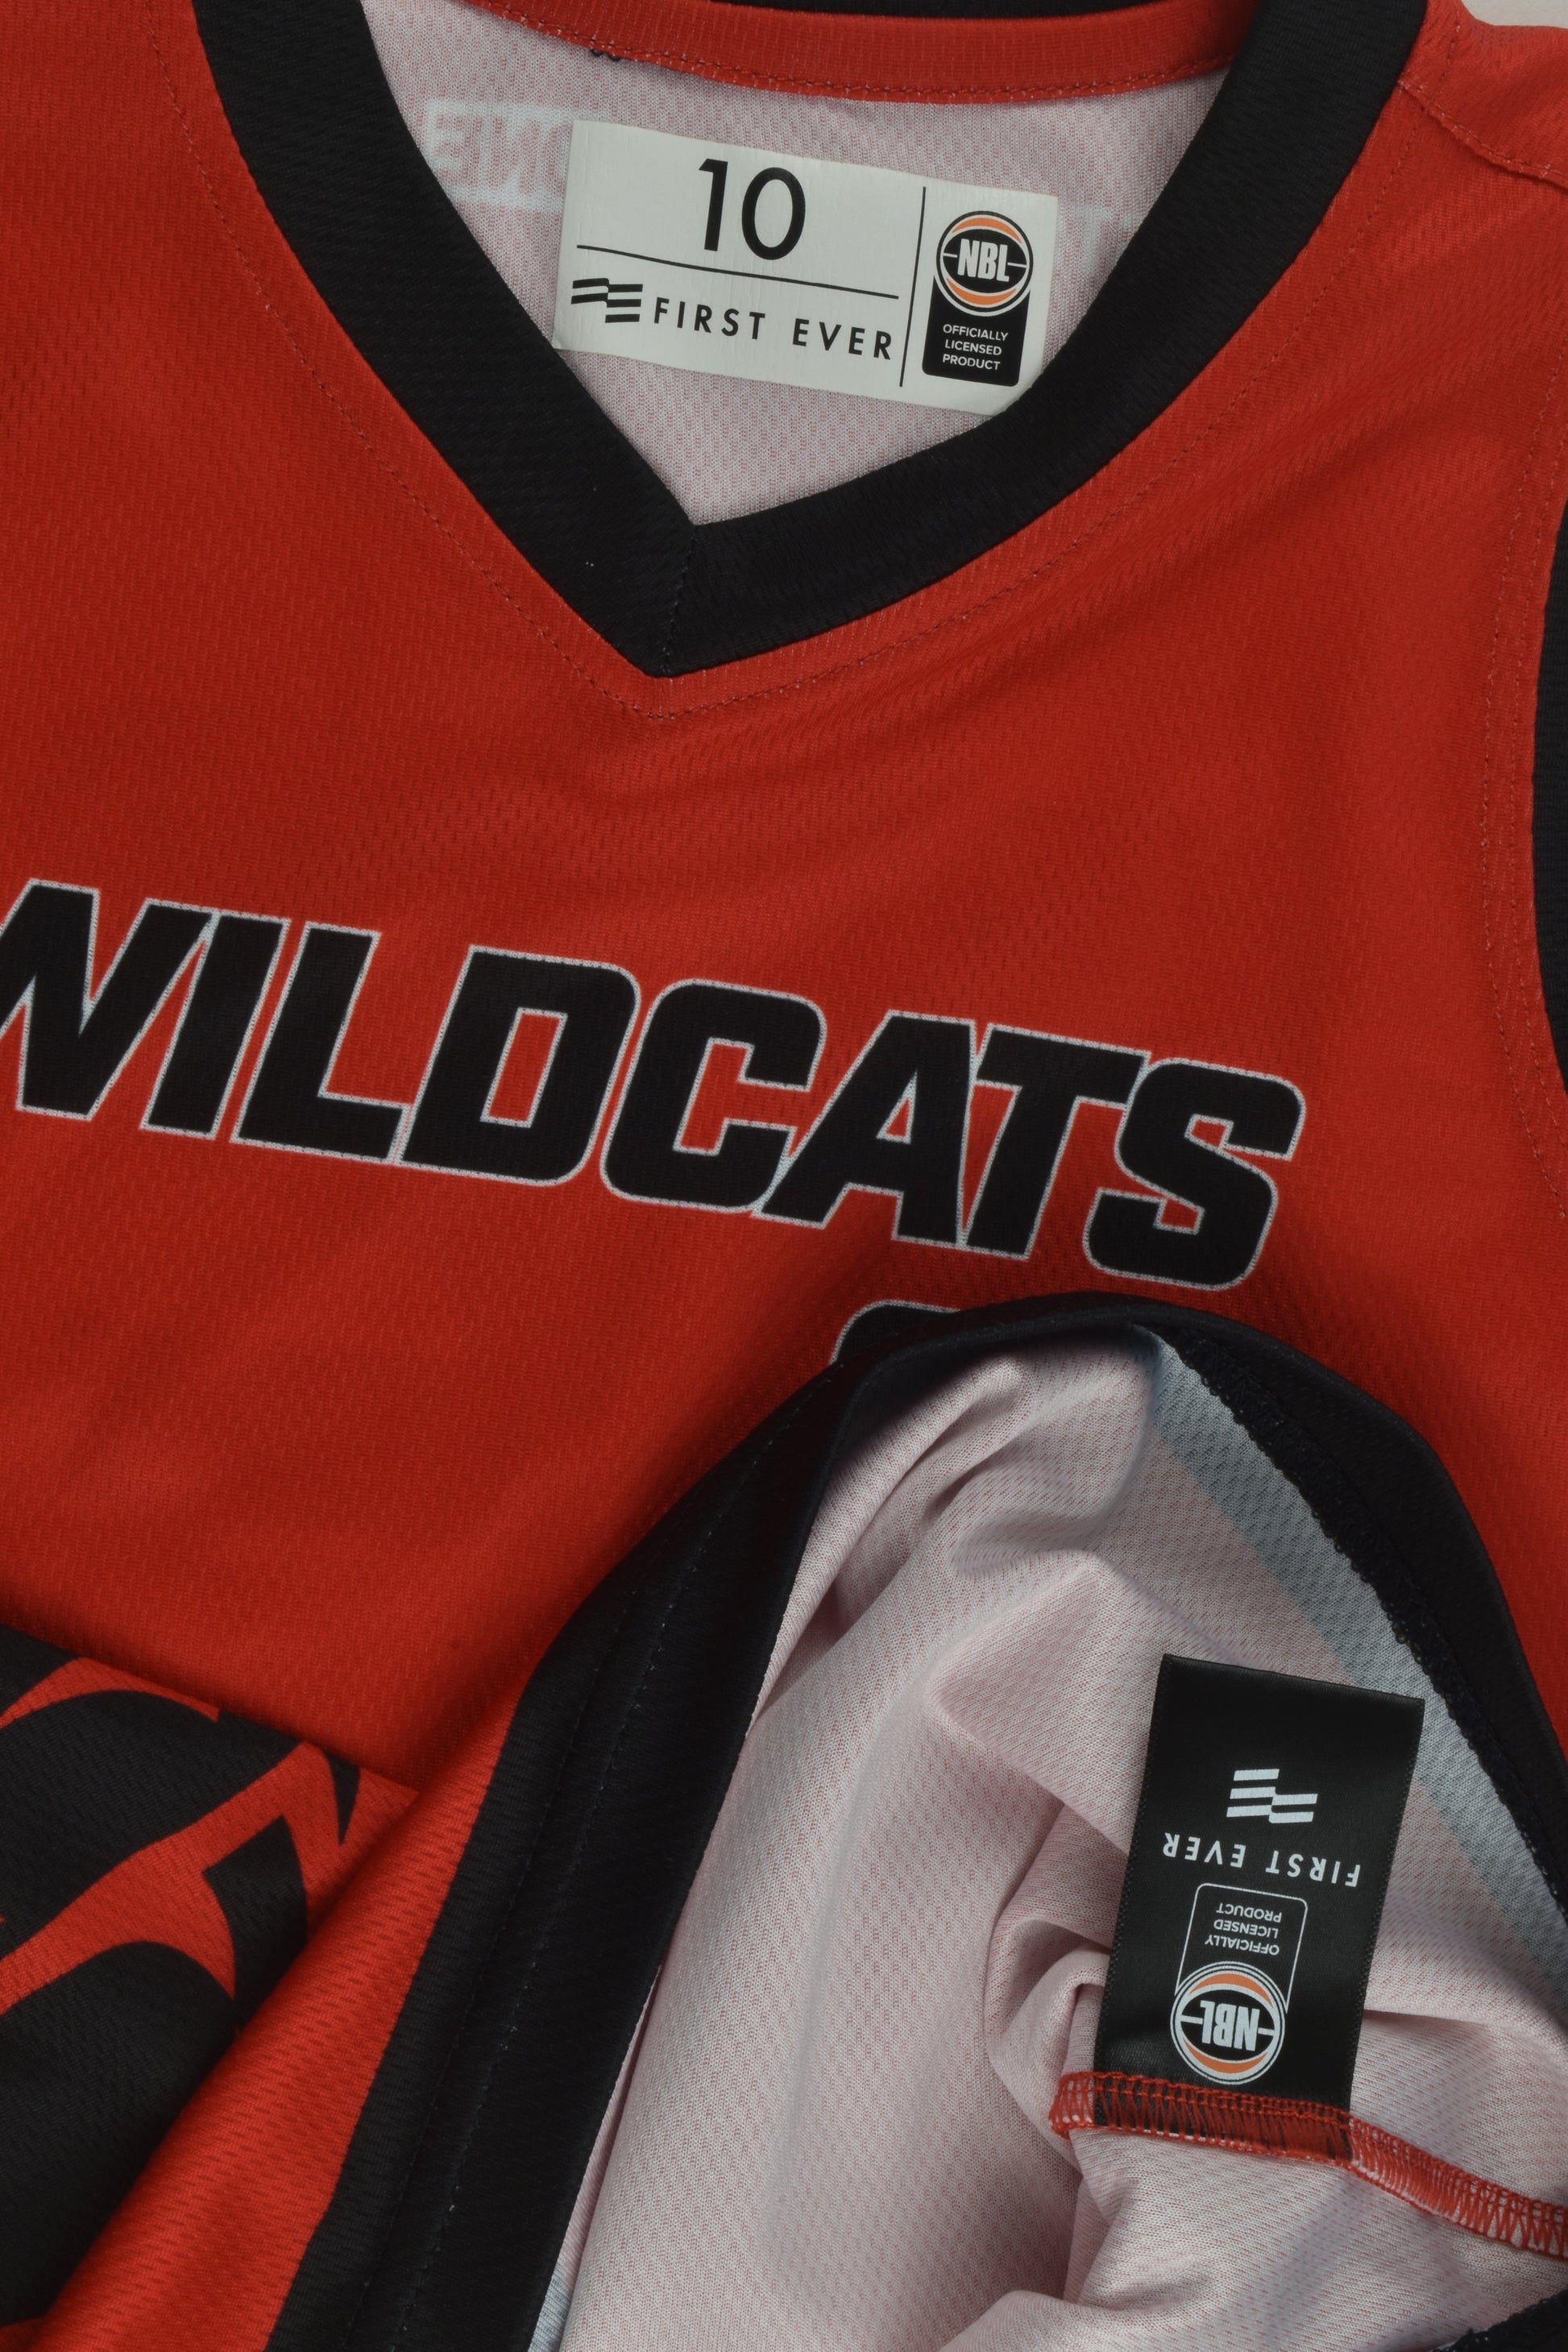 First Ever Size 10 Wildcats Basketball Jersey